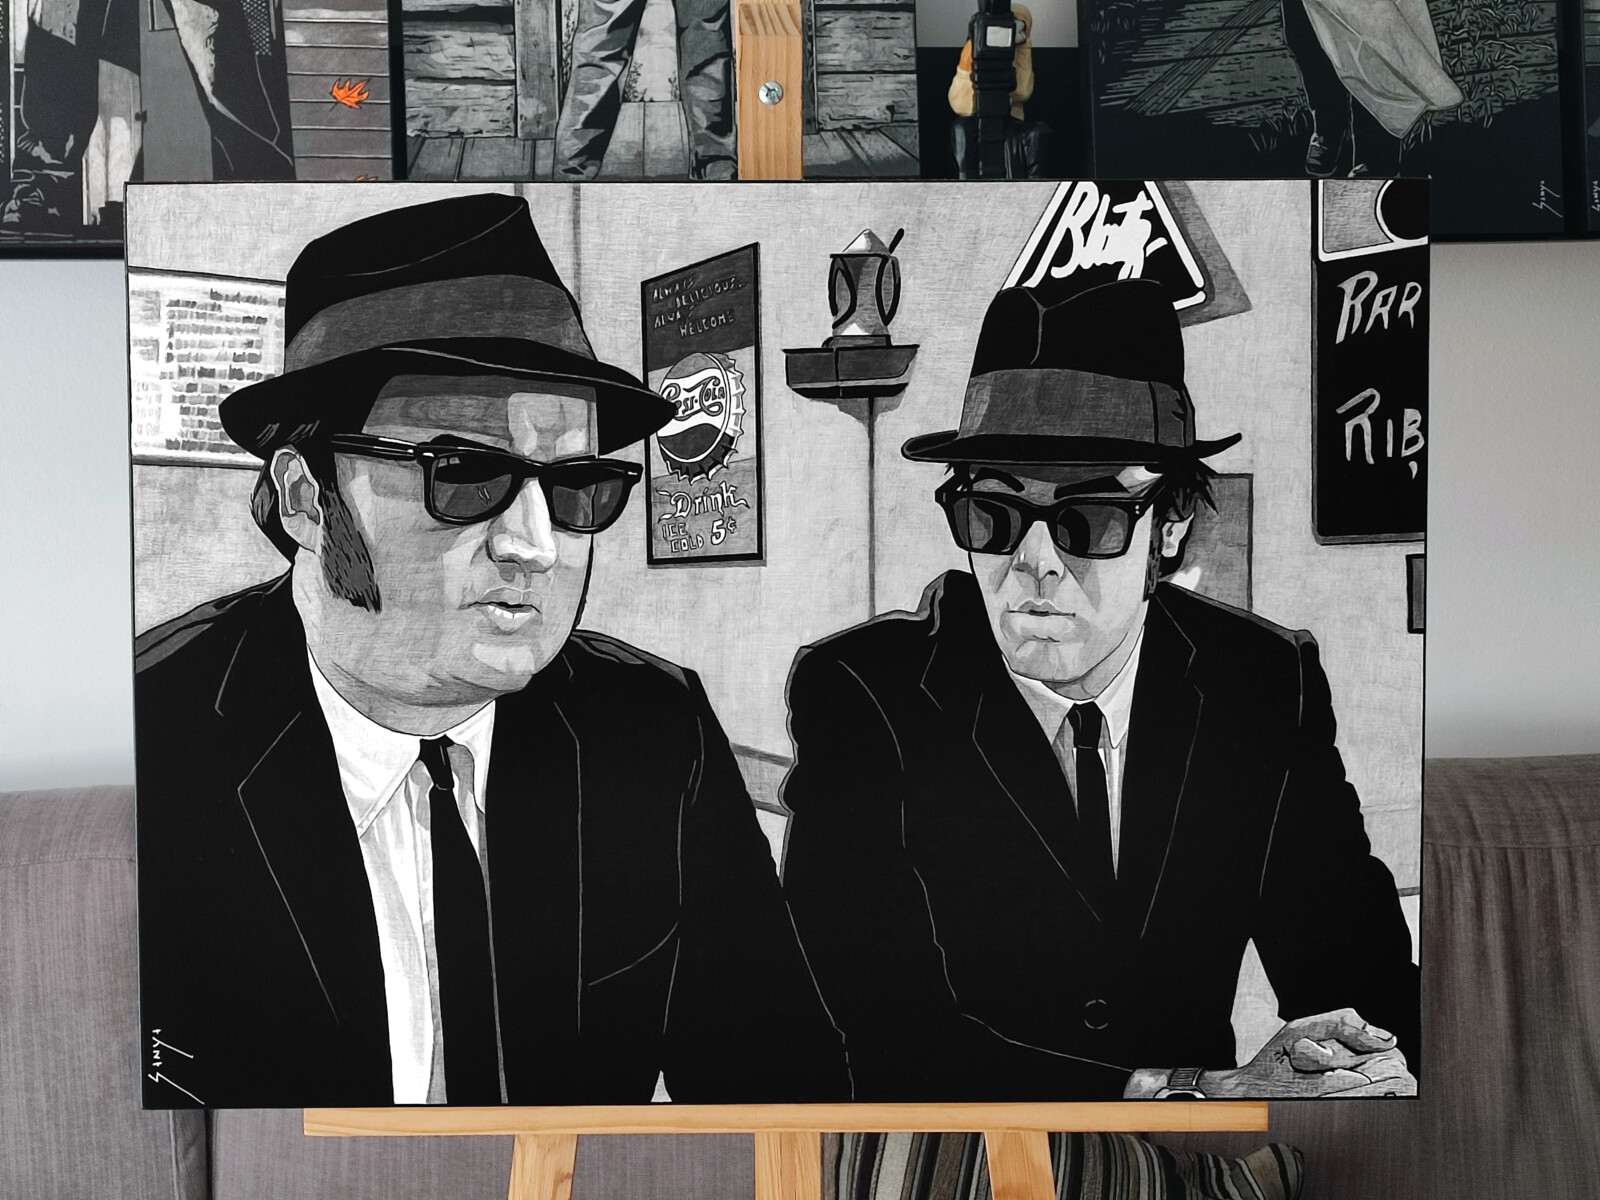 THE BLUES BROTHERS (Variant version)